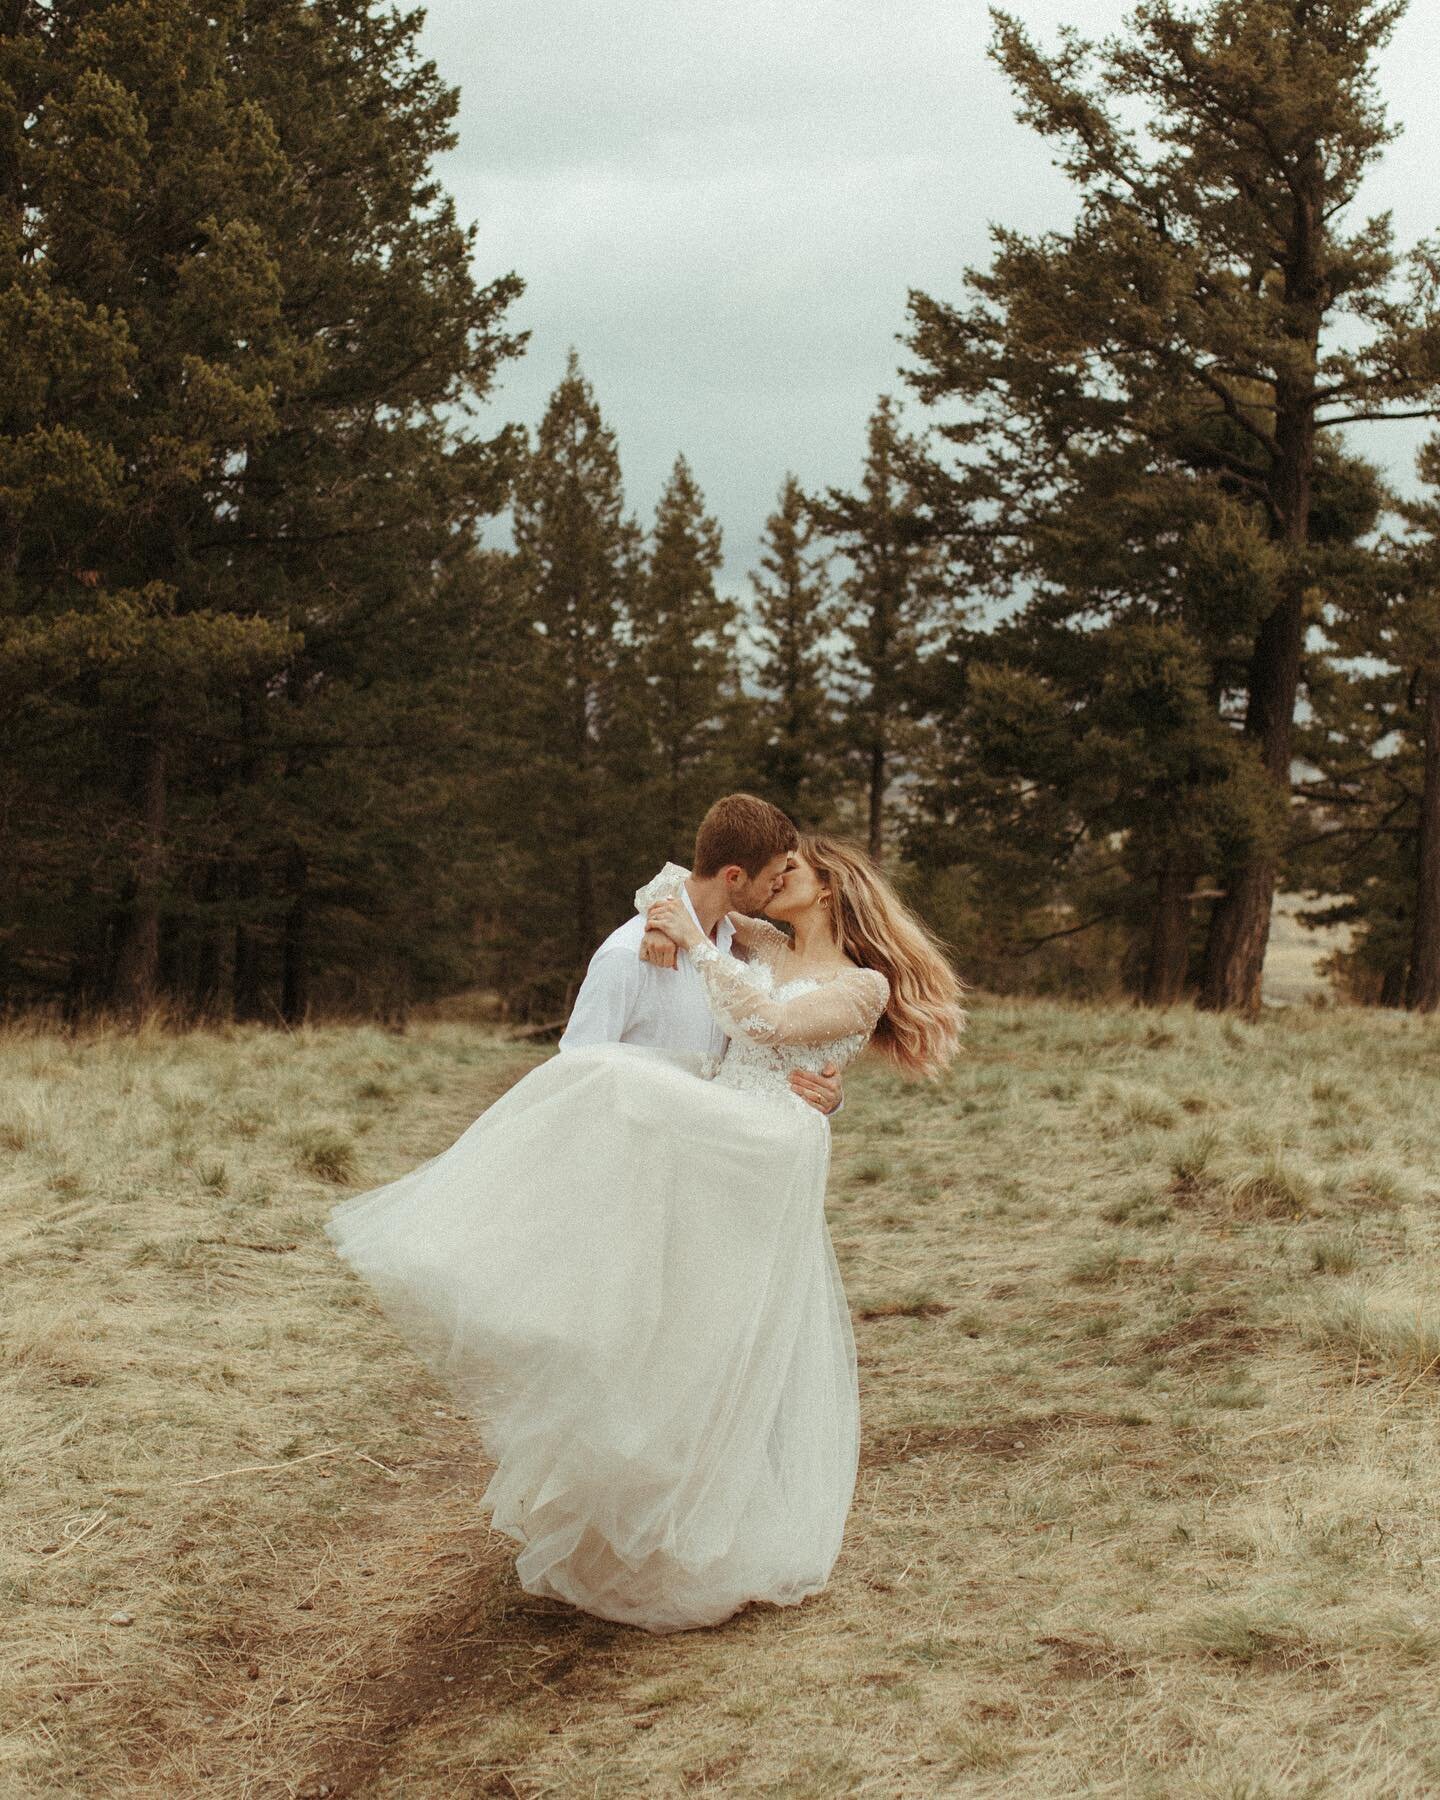 I took these back in April when I went to Montana with @cm.hamilton.photos and am just now posting them😅I am so backlogged with photos it's not even funny. And honestly I never even post photos from like 70% of shoots/weddings, there's just too many